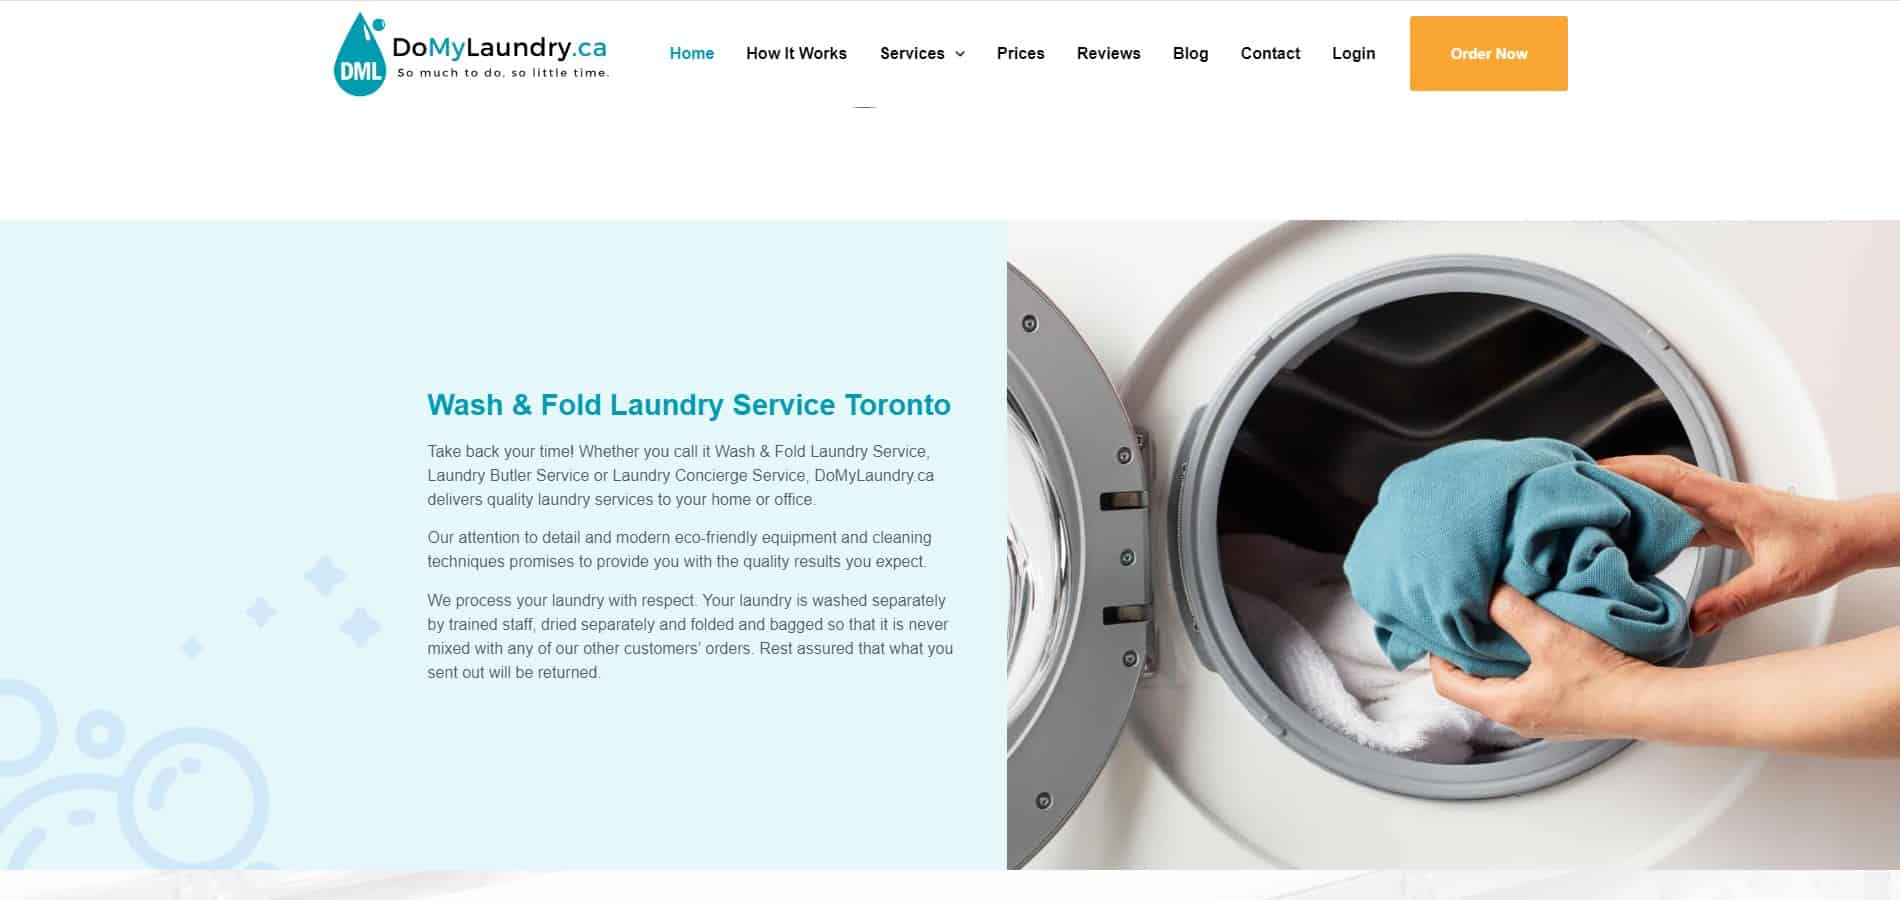 A website design for a laundry service.